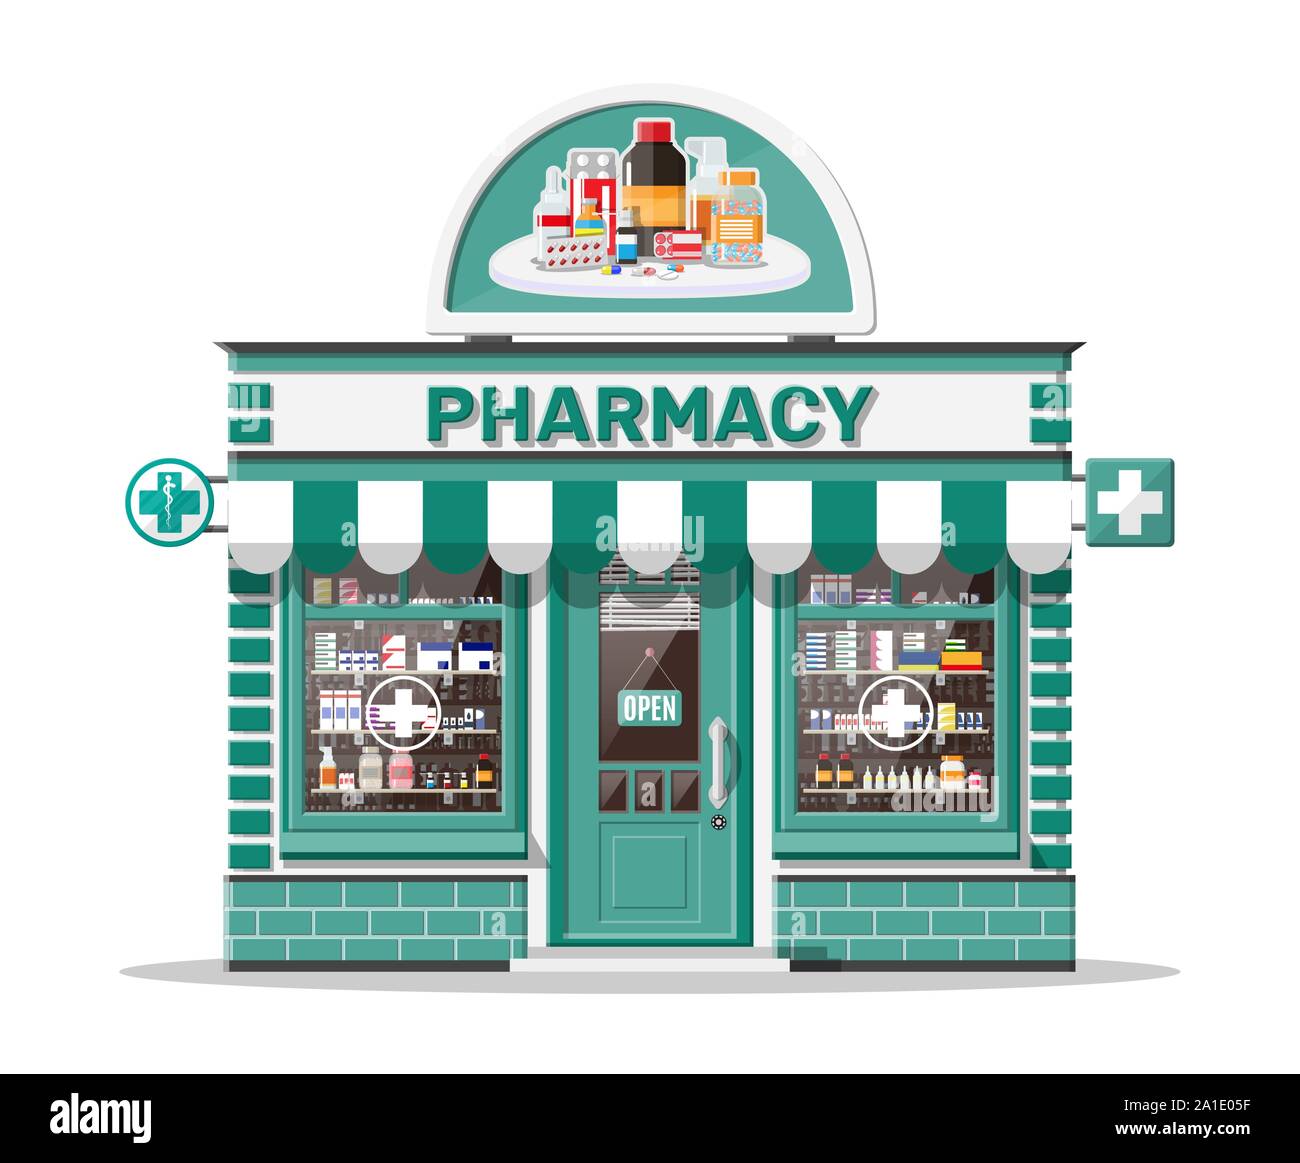 Facade pharmacy or drugstore with signboard Stock Vector